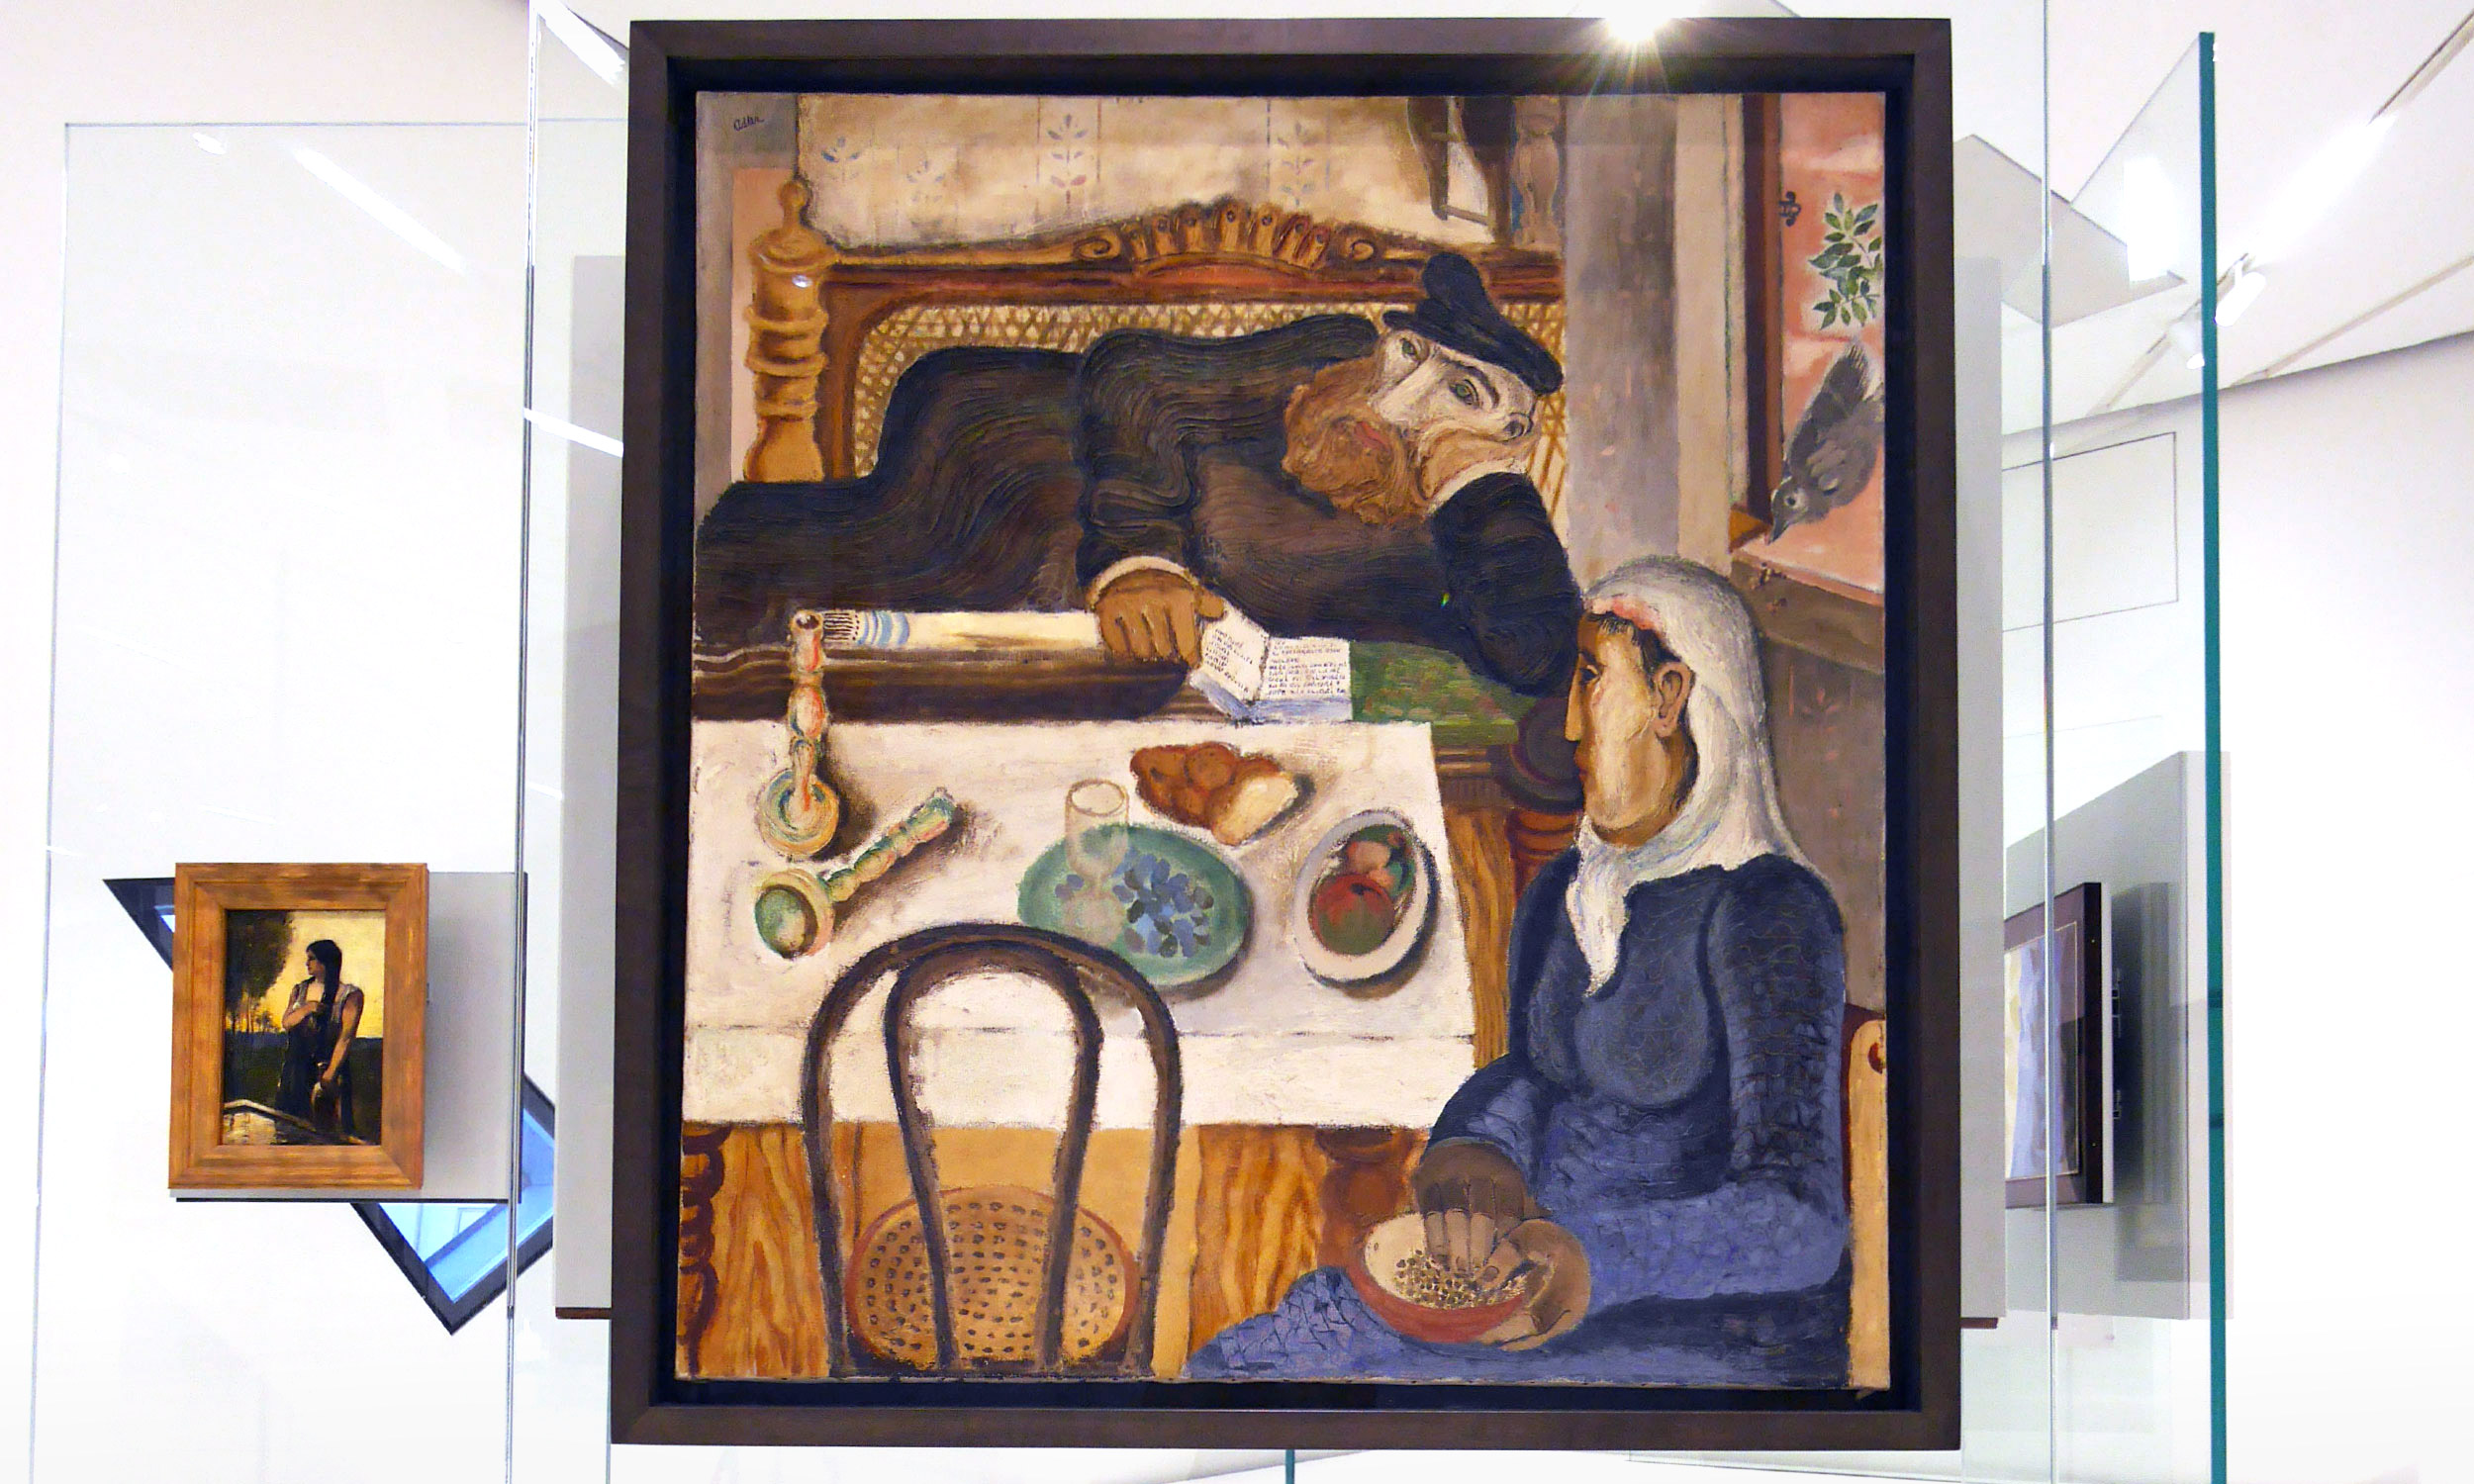 Photo of the painting "Sabbath" by Janker Adler in Jewish Museum in Berlin. The artwork hangs on a glass wall, which stands in the middle of the room. To the left you can see another much smaller painting by the same artist, showing a woman.